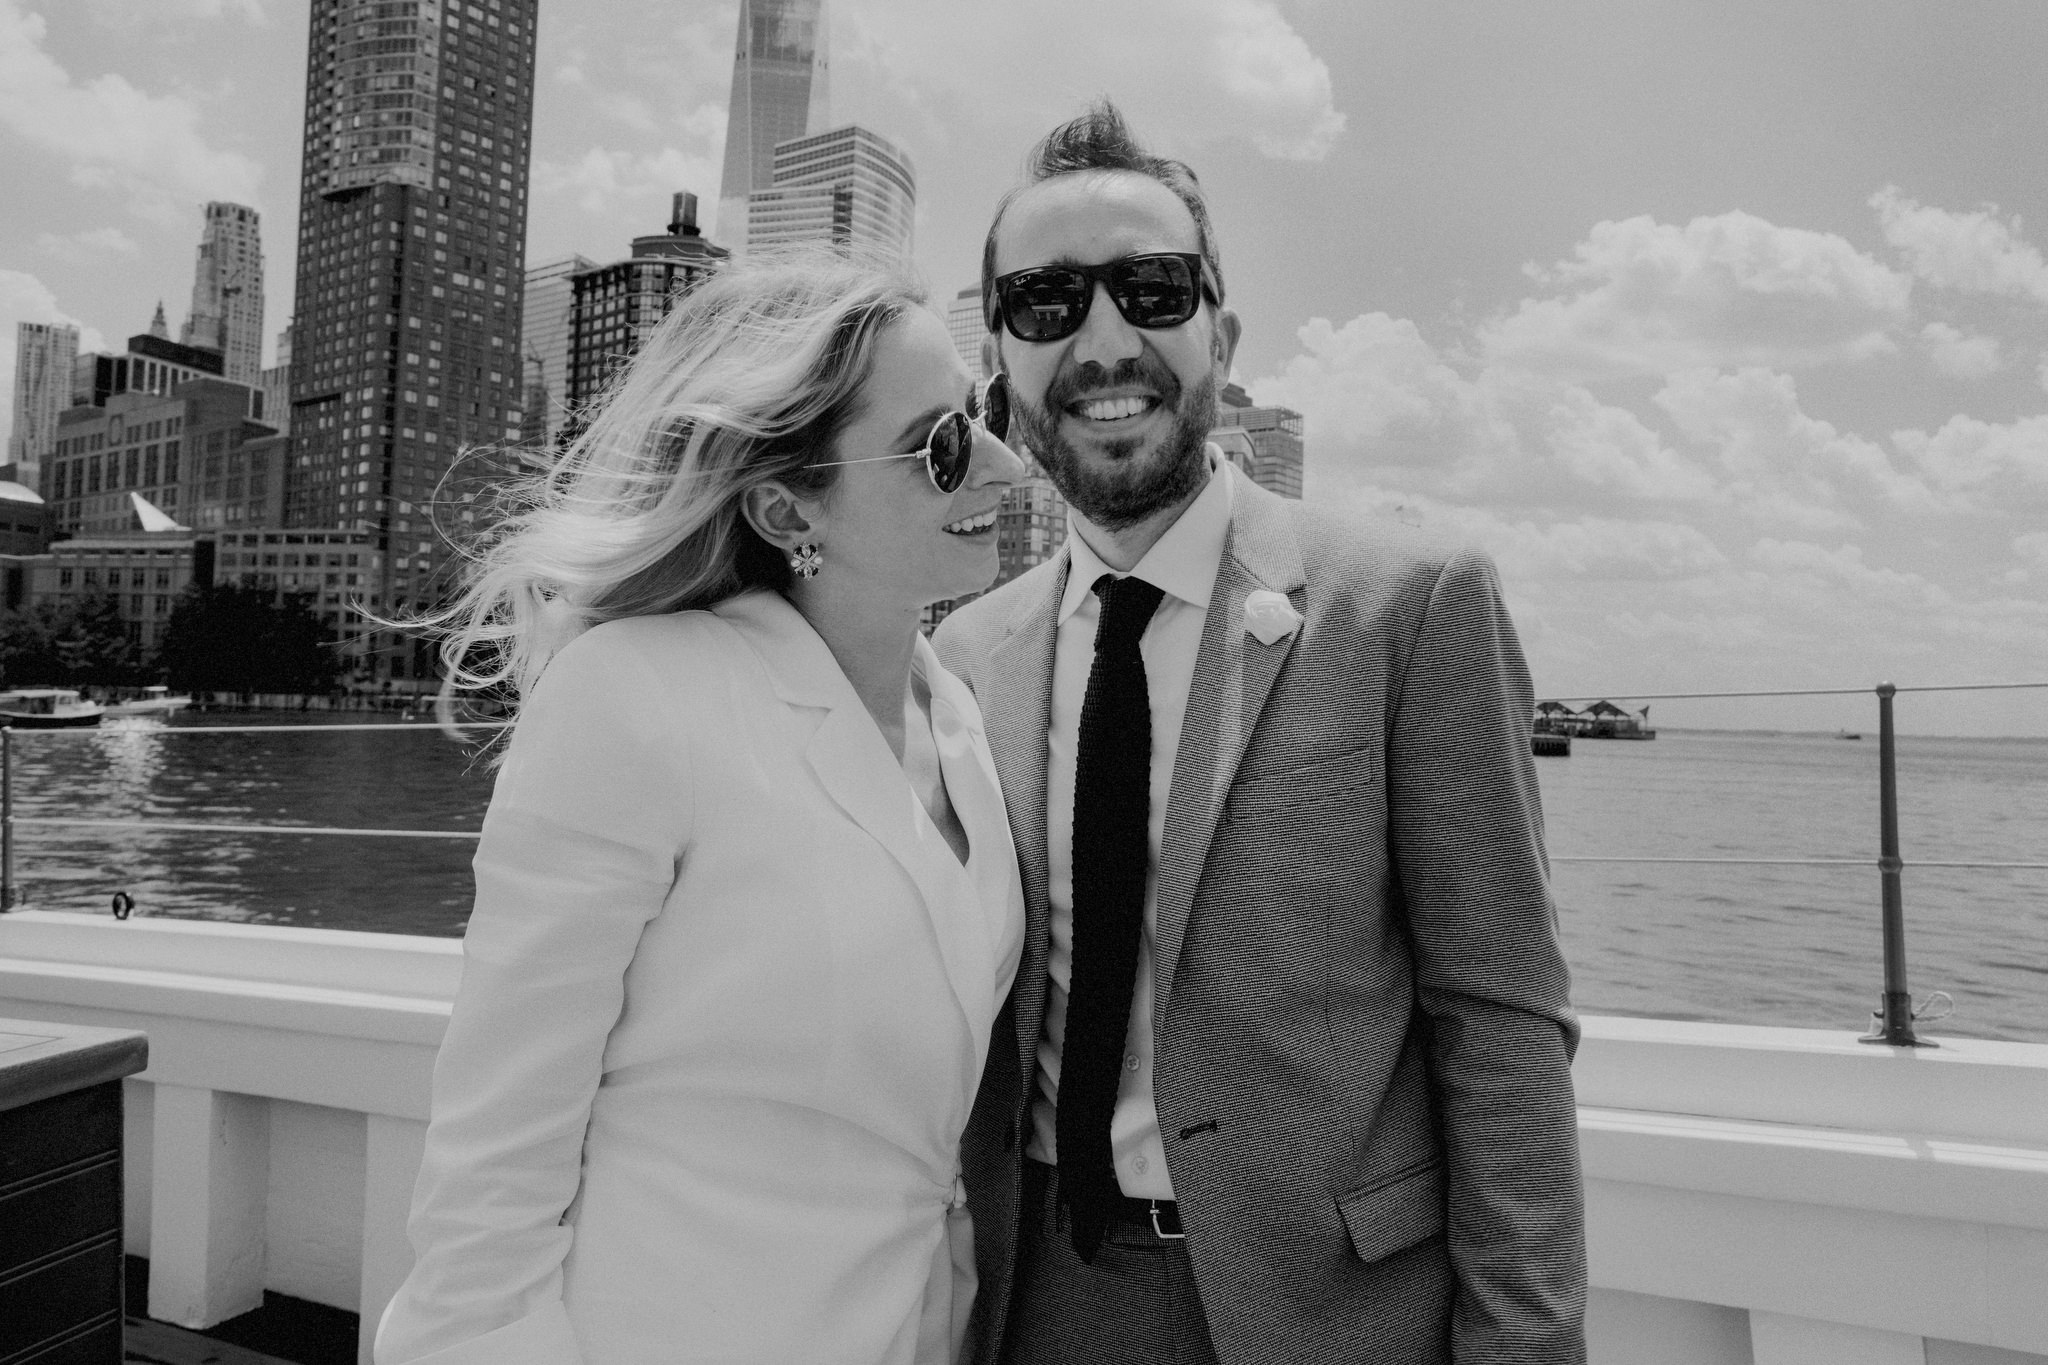 The bride and groom are enjoying the view at the New York harbor while cruising on a boat. Intimate wedding image by Jenny Fu Studio